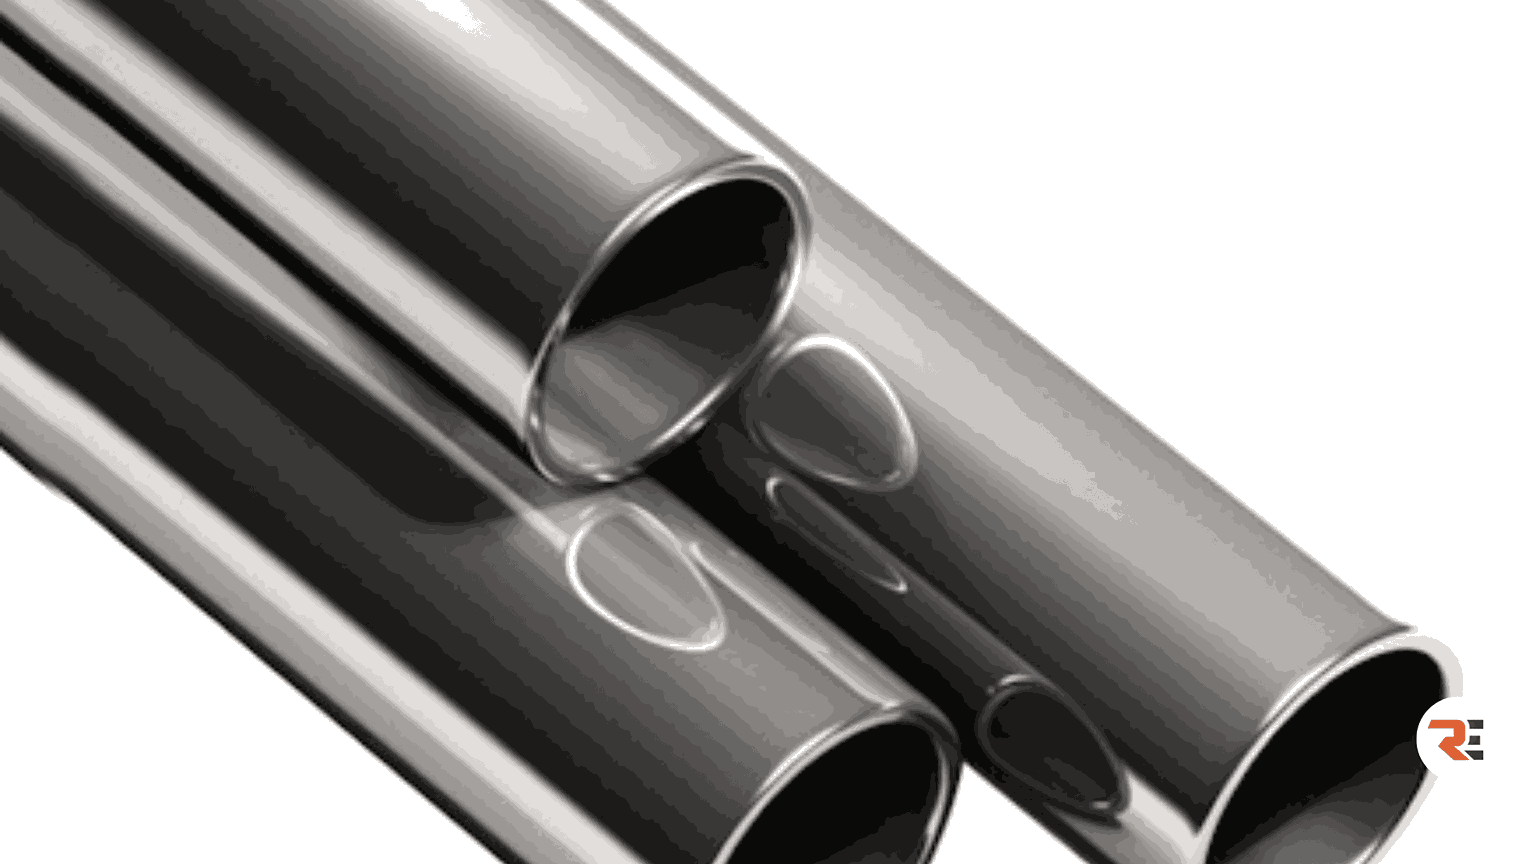 Types Of Oil & Gas Pipes: Seamless, Erw, Lsaw